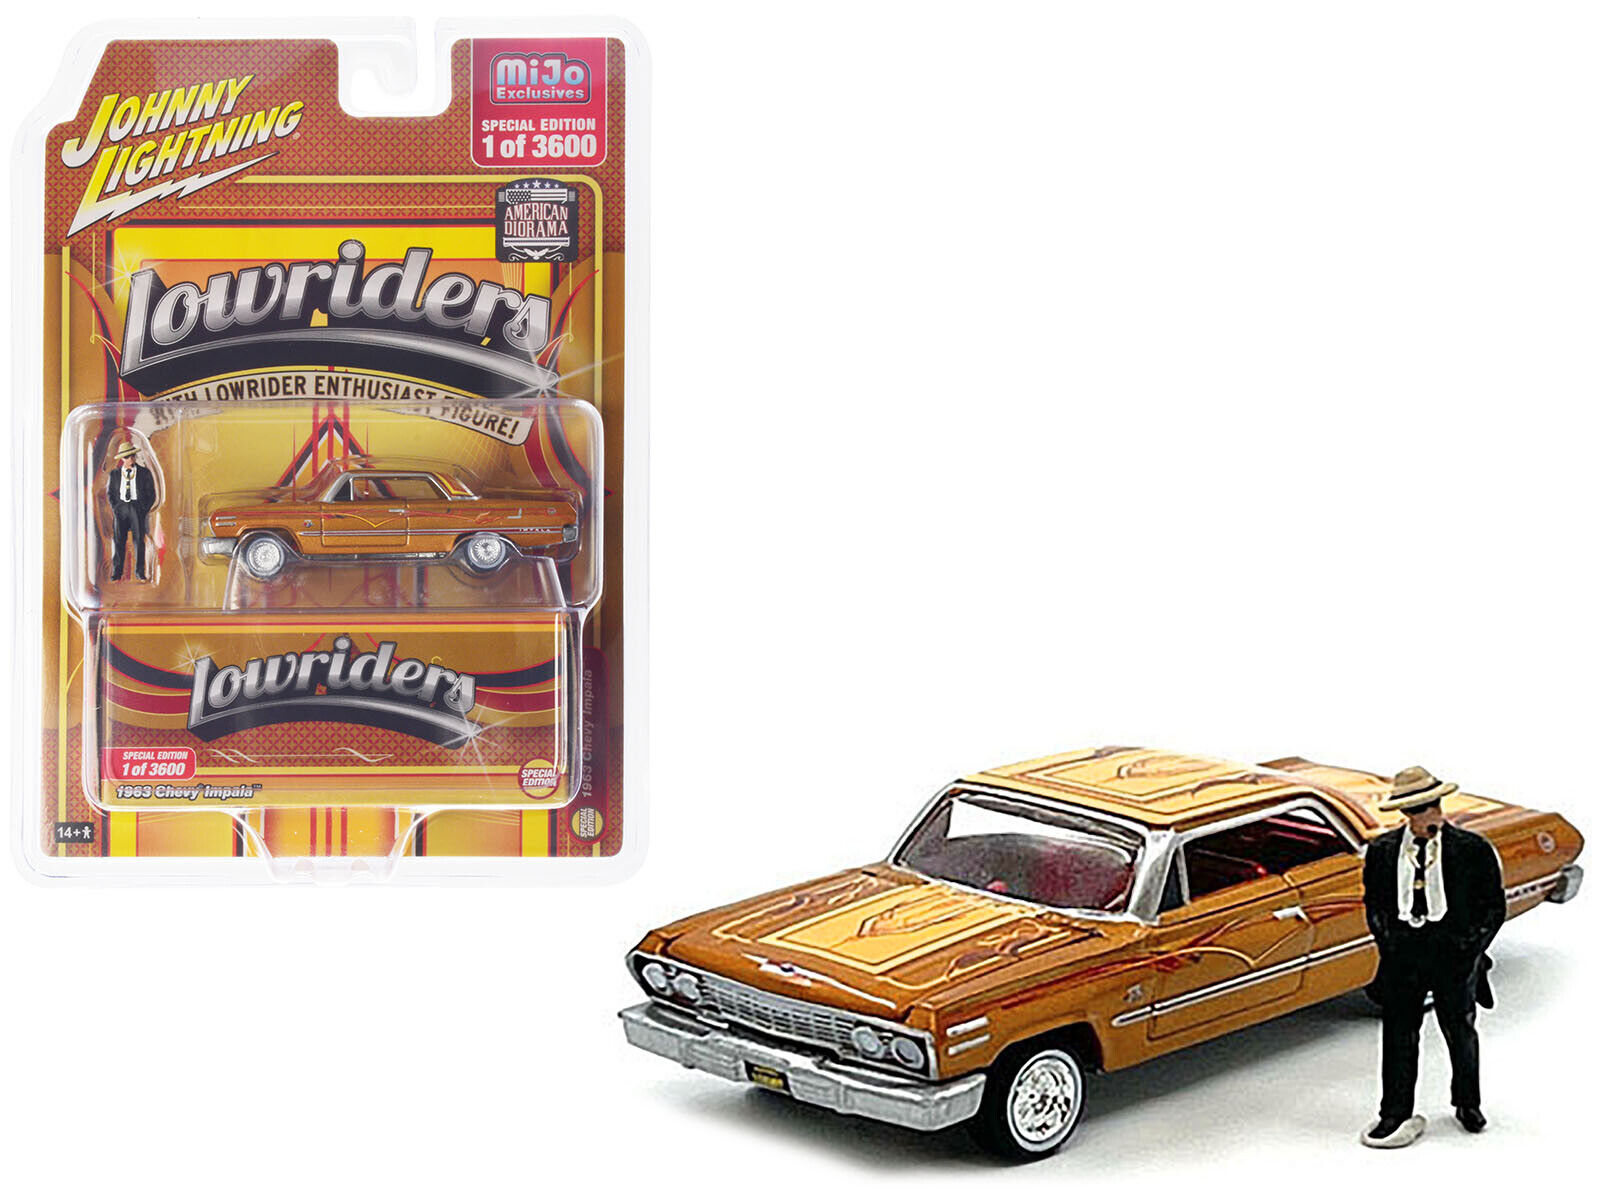 1963 Chevrolet Impala Lowrider Orange with Graphics and Diecast Figure Limited